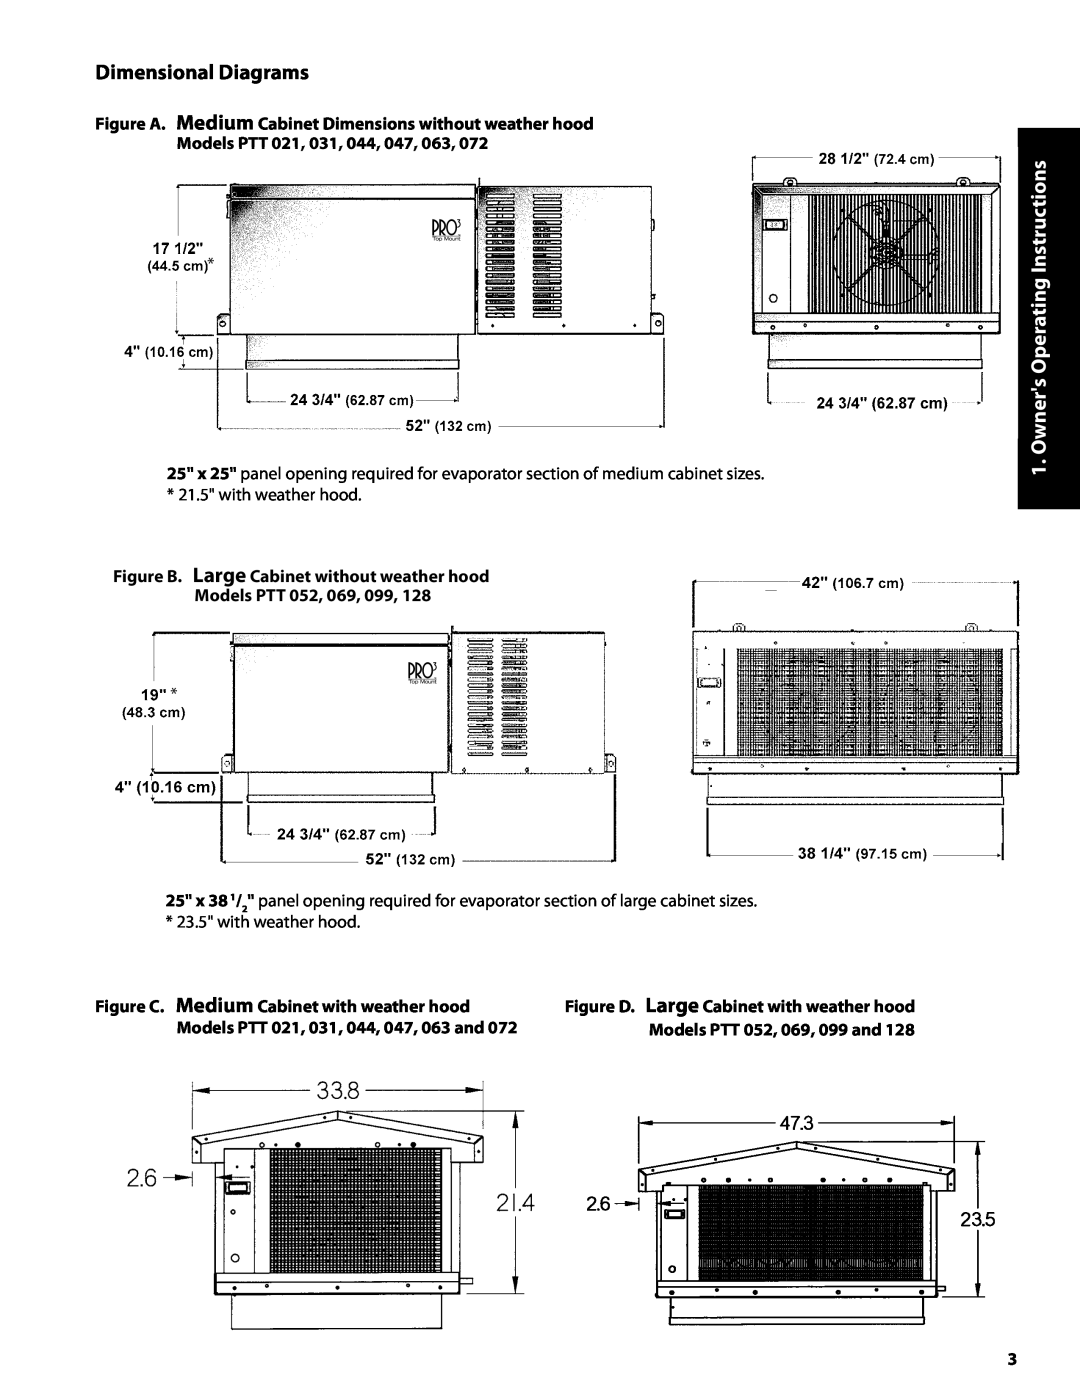 Heatcraft Refrigeration Products H-IM-82B Dimensional Diagrams, Owners Operating Instructions 